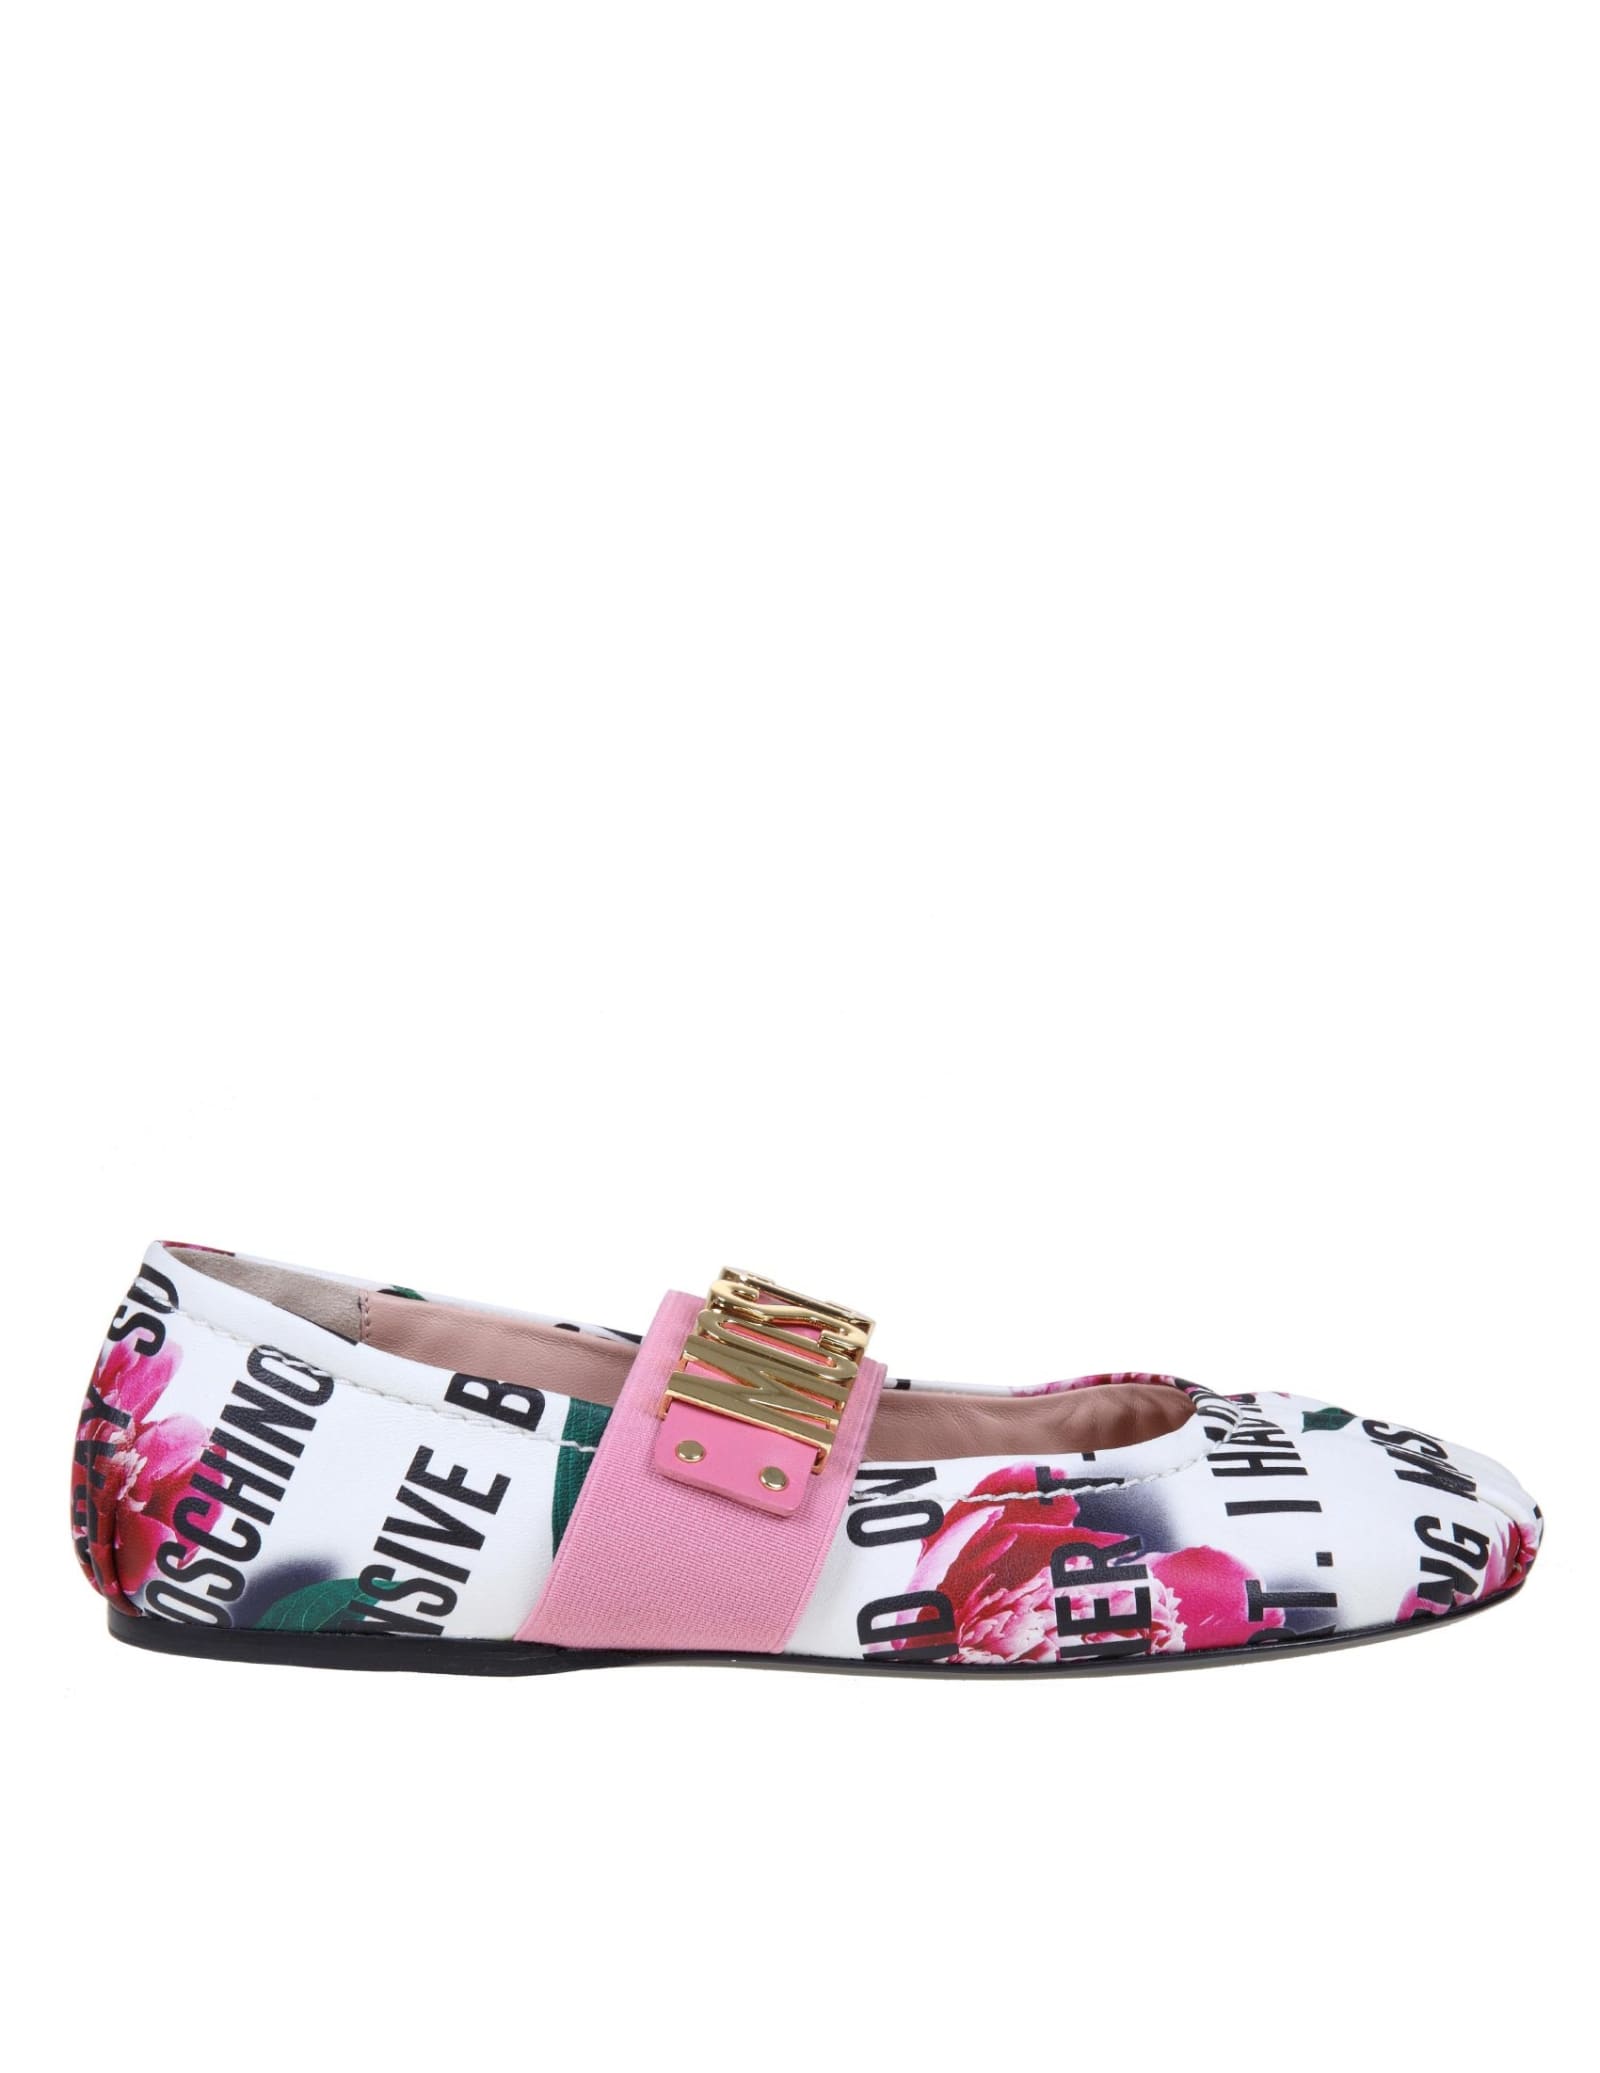 Buy Moschino Flats In Nappa Maxi Lettering online, shop Moschino shoes with free shipping